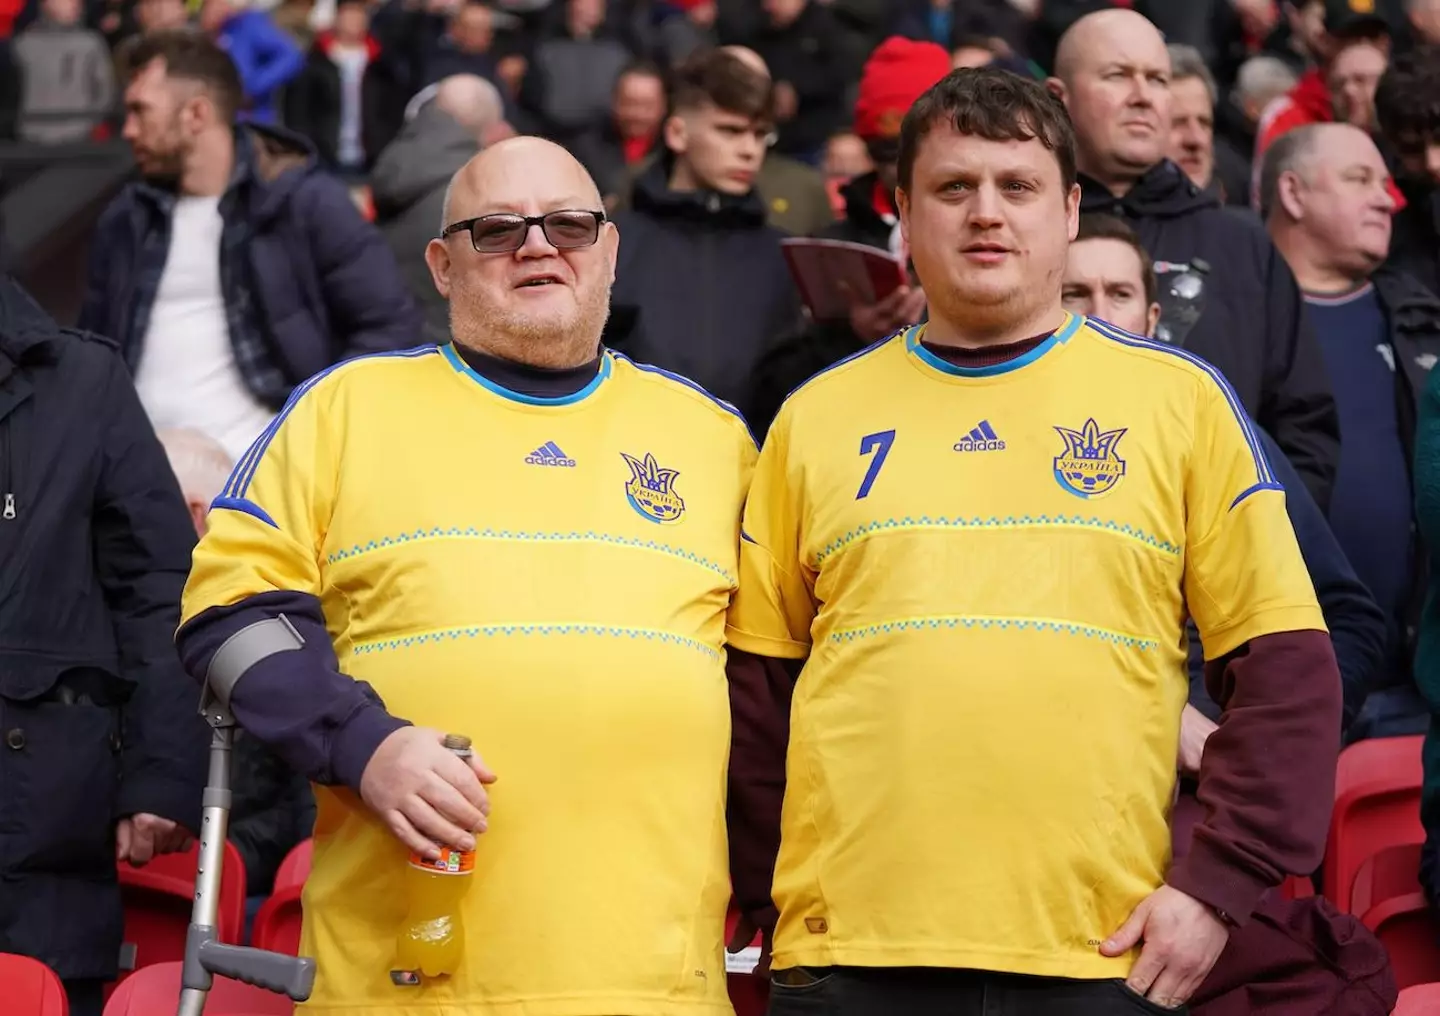 Fans wearing Ukraine shirts at Old Trafford today.